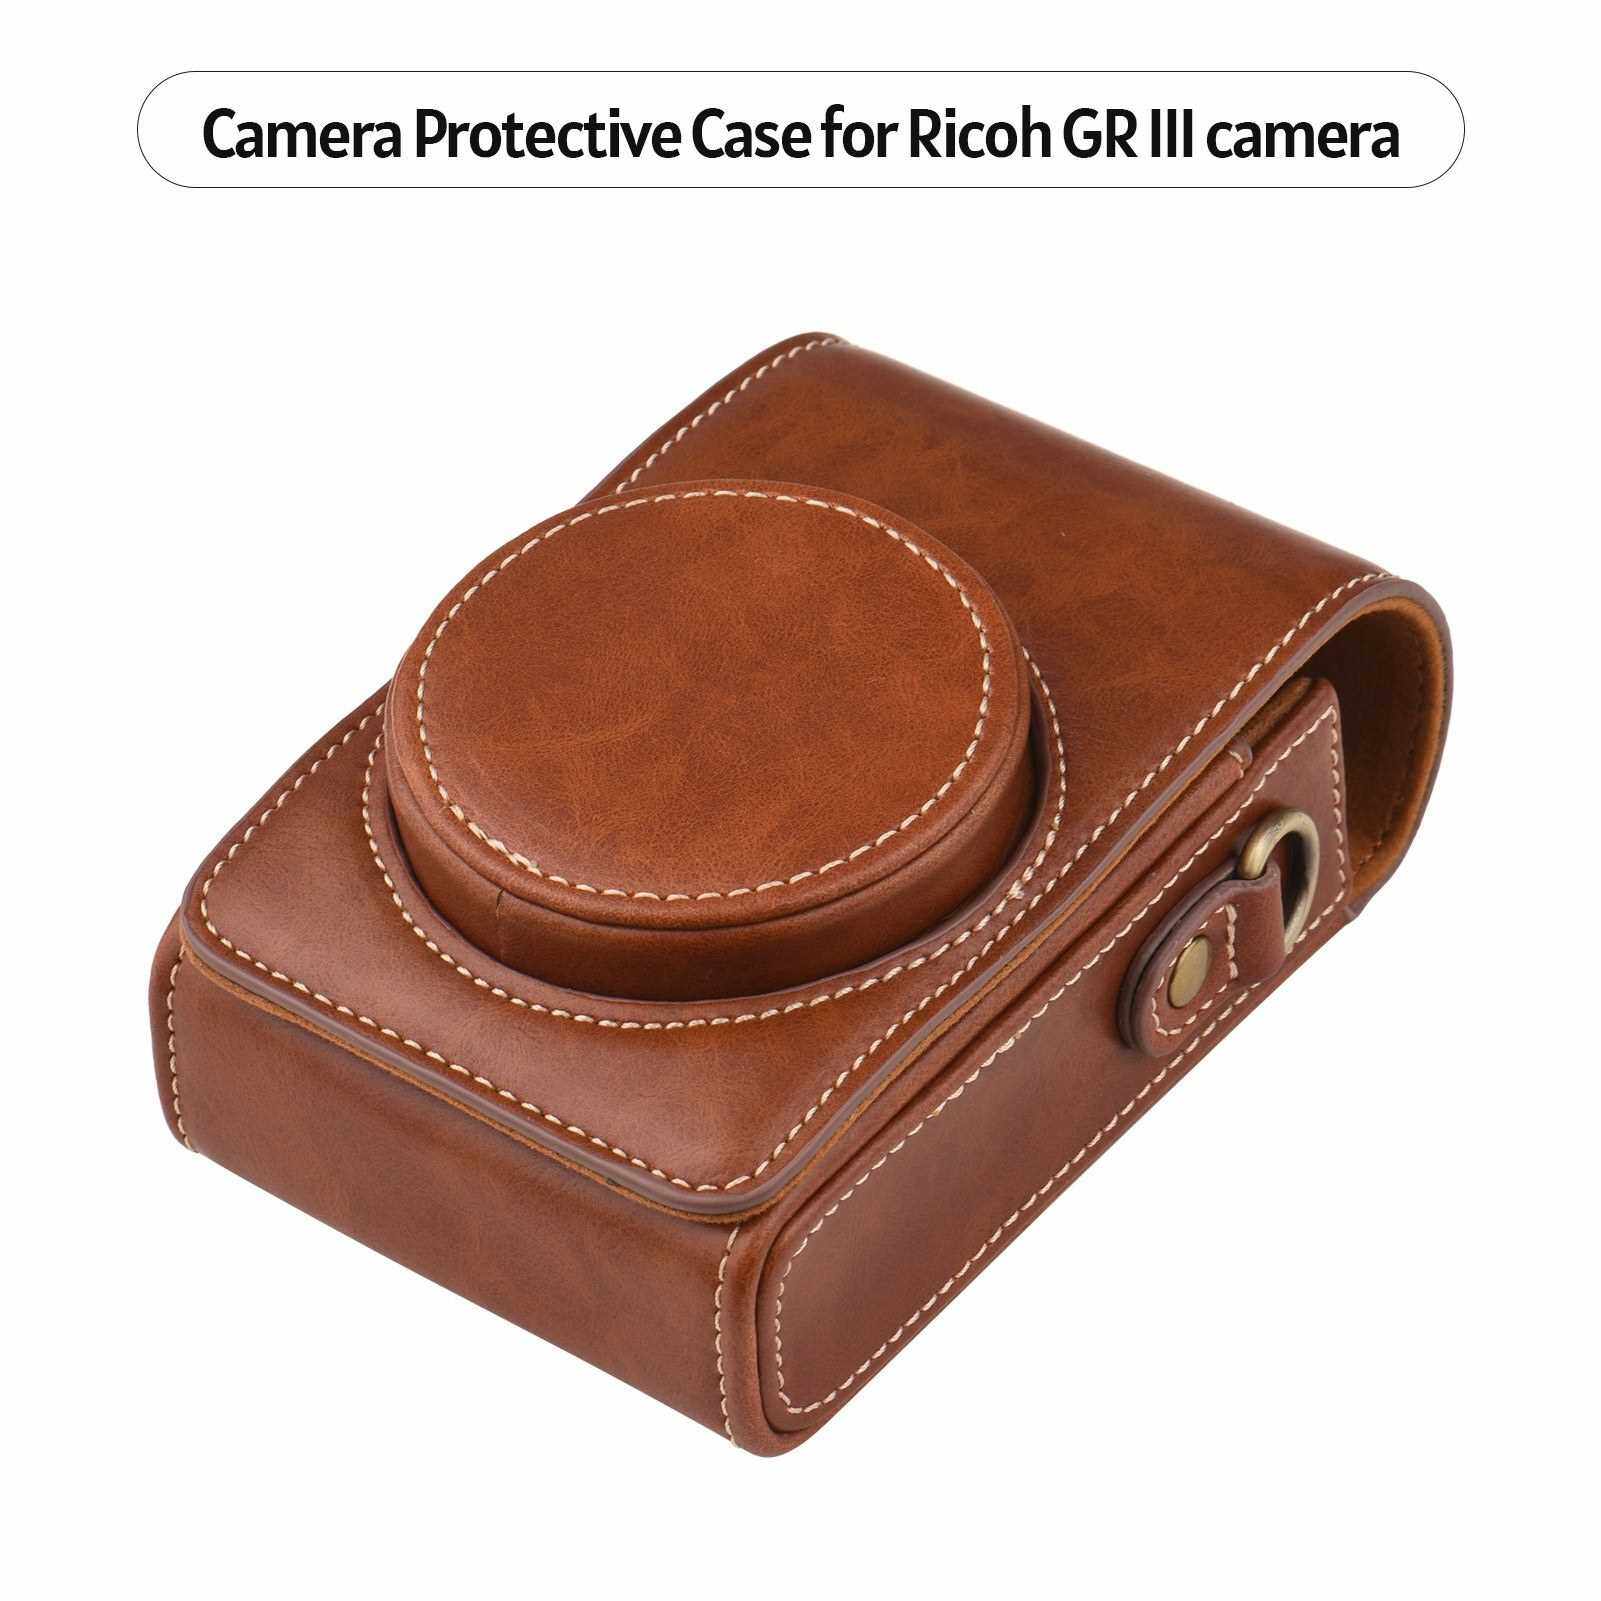 People's Choice Portable Camera Case Carry Bag Synthetic Leather with Shoulder Strap Replacement for Sony RX100/ RX100 II/ RX100 III/ RX100 IV/ RX100V/ RX100 VI/ RX100 VII/ ZV1 for Ricoh GR2/ GR3 (Brown)